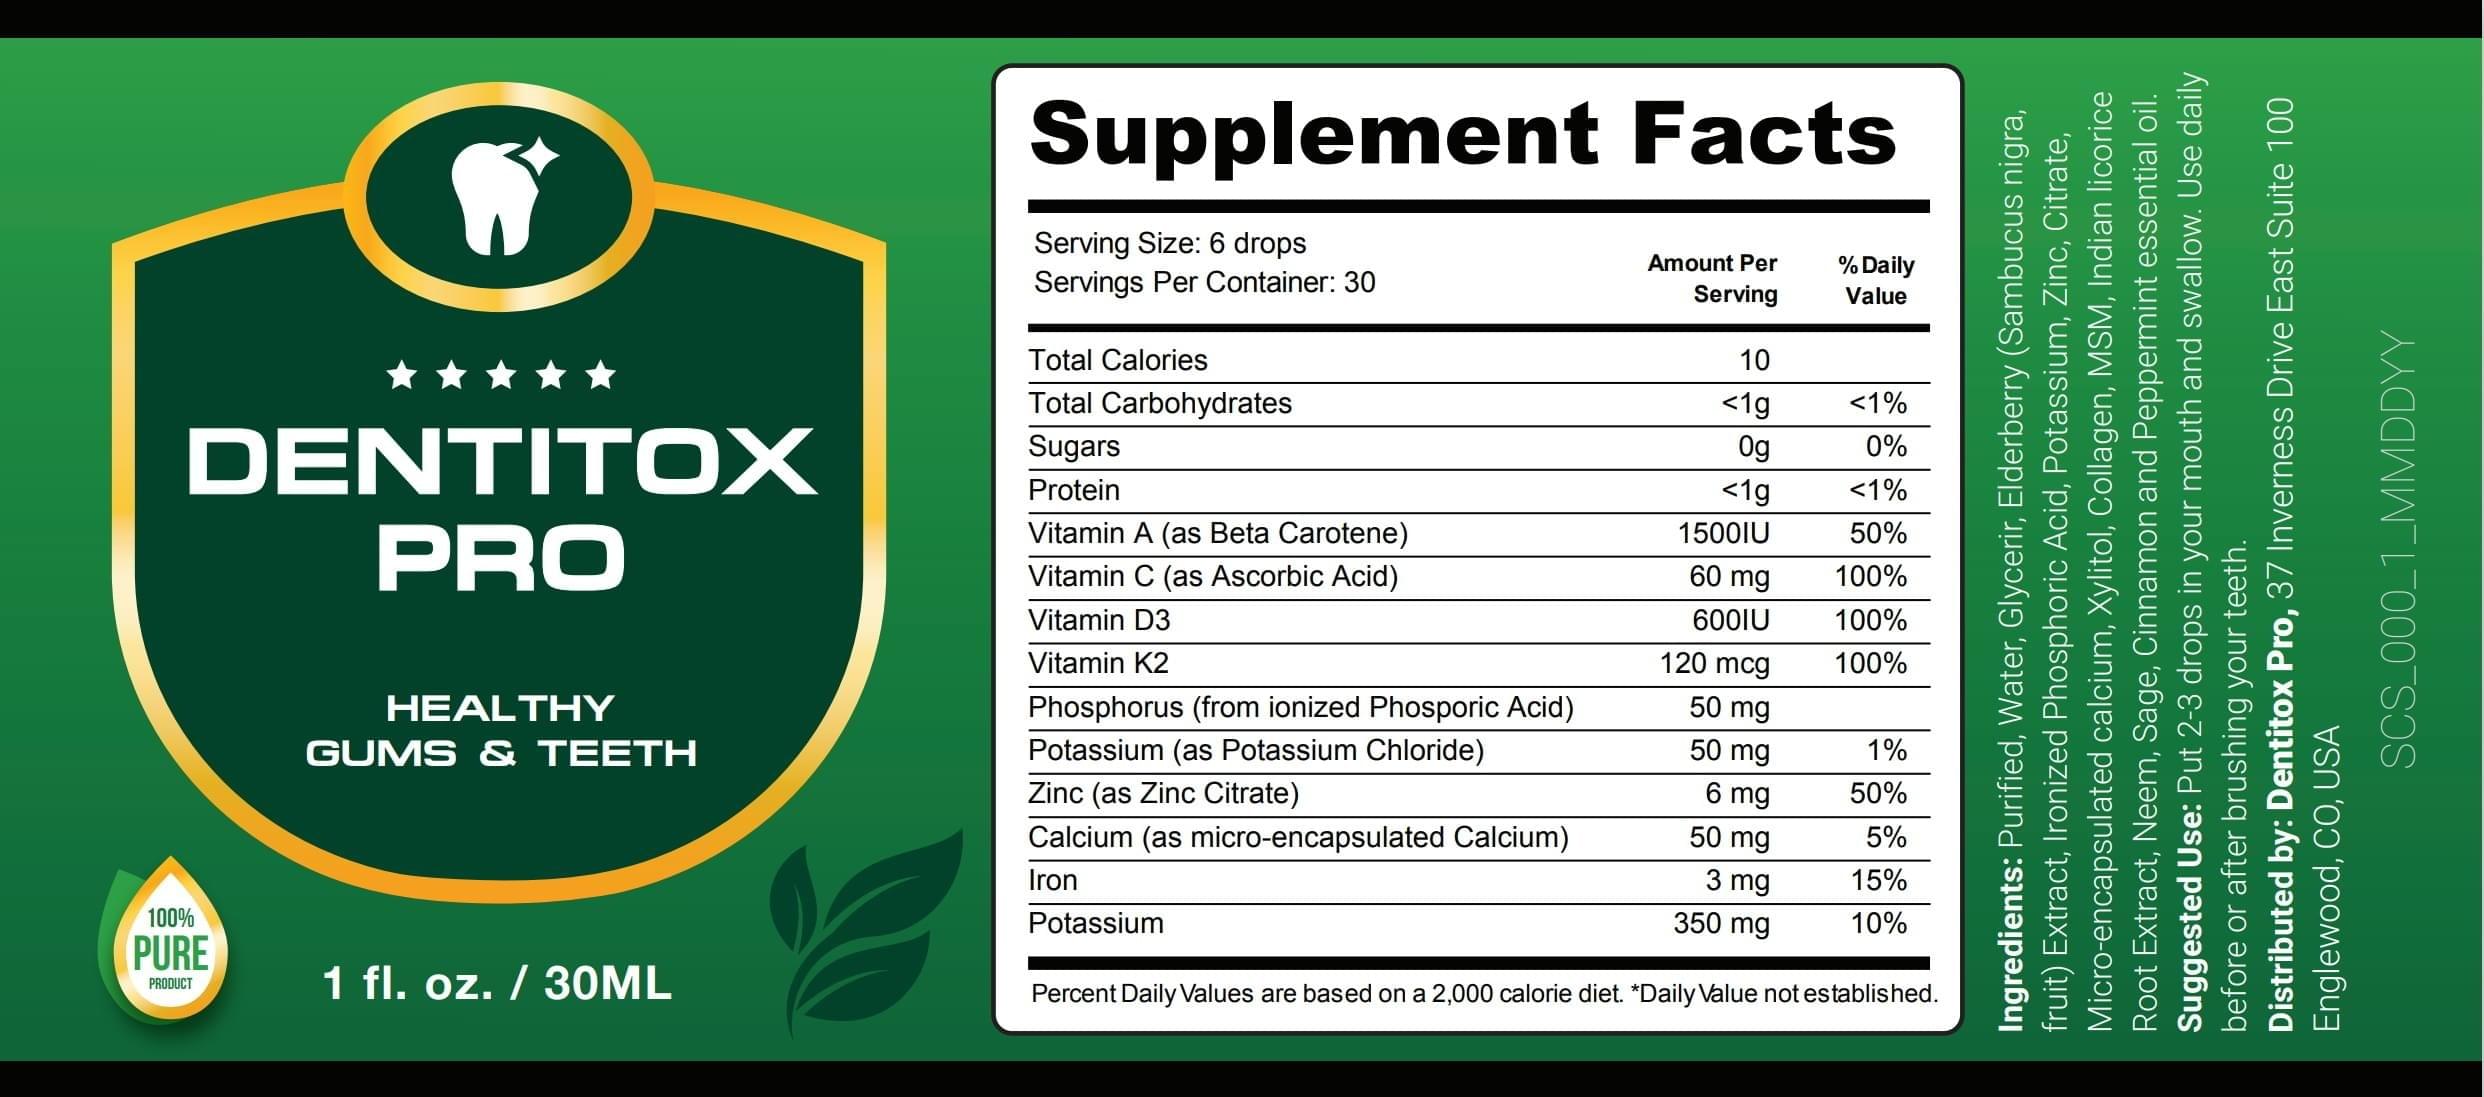 Dentitox Pro Supplements Facts